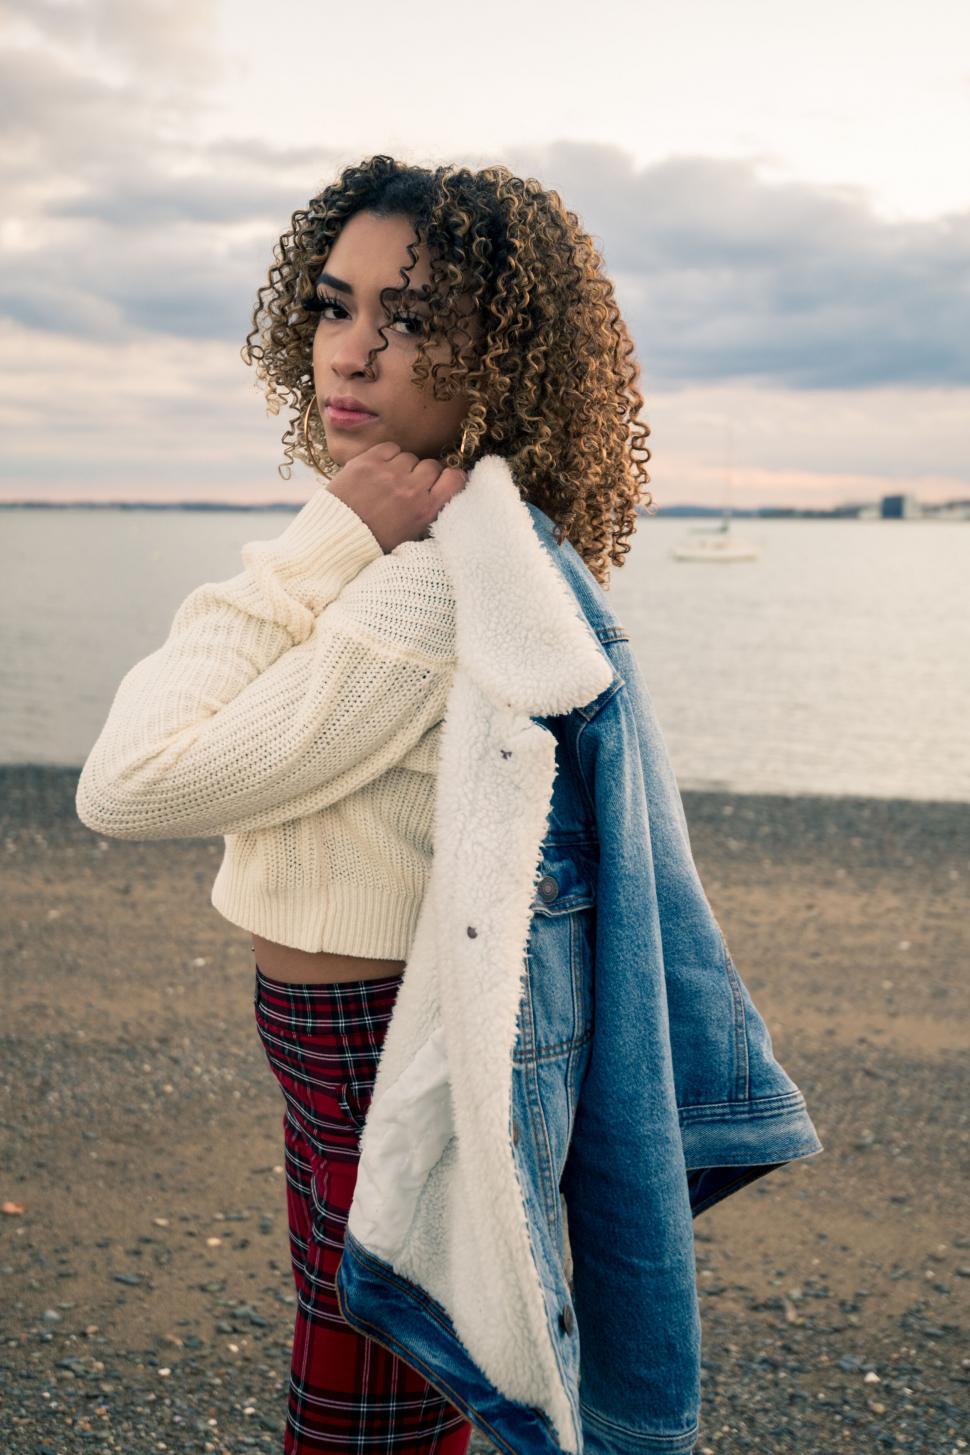 Free Image of Curly-haired woman by the sea 